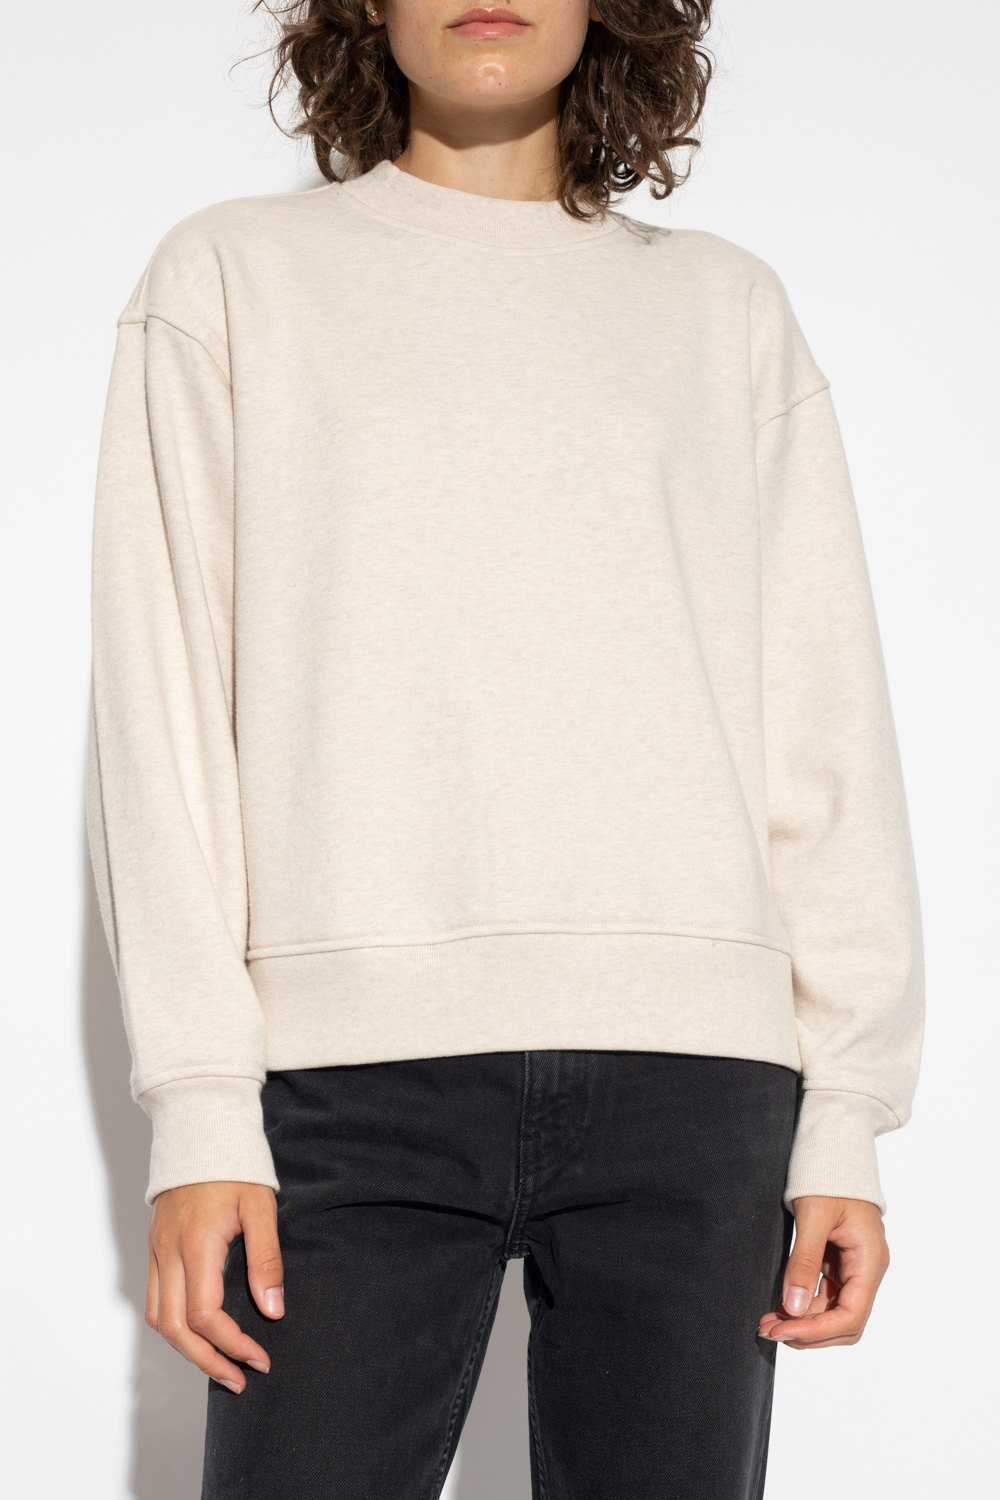 Levi's three-quarter sweatshirt ‘Made & Crafted®’ collection